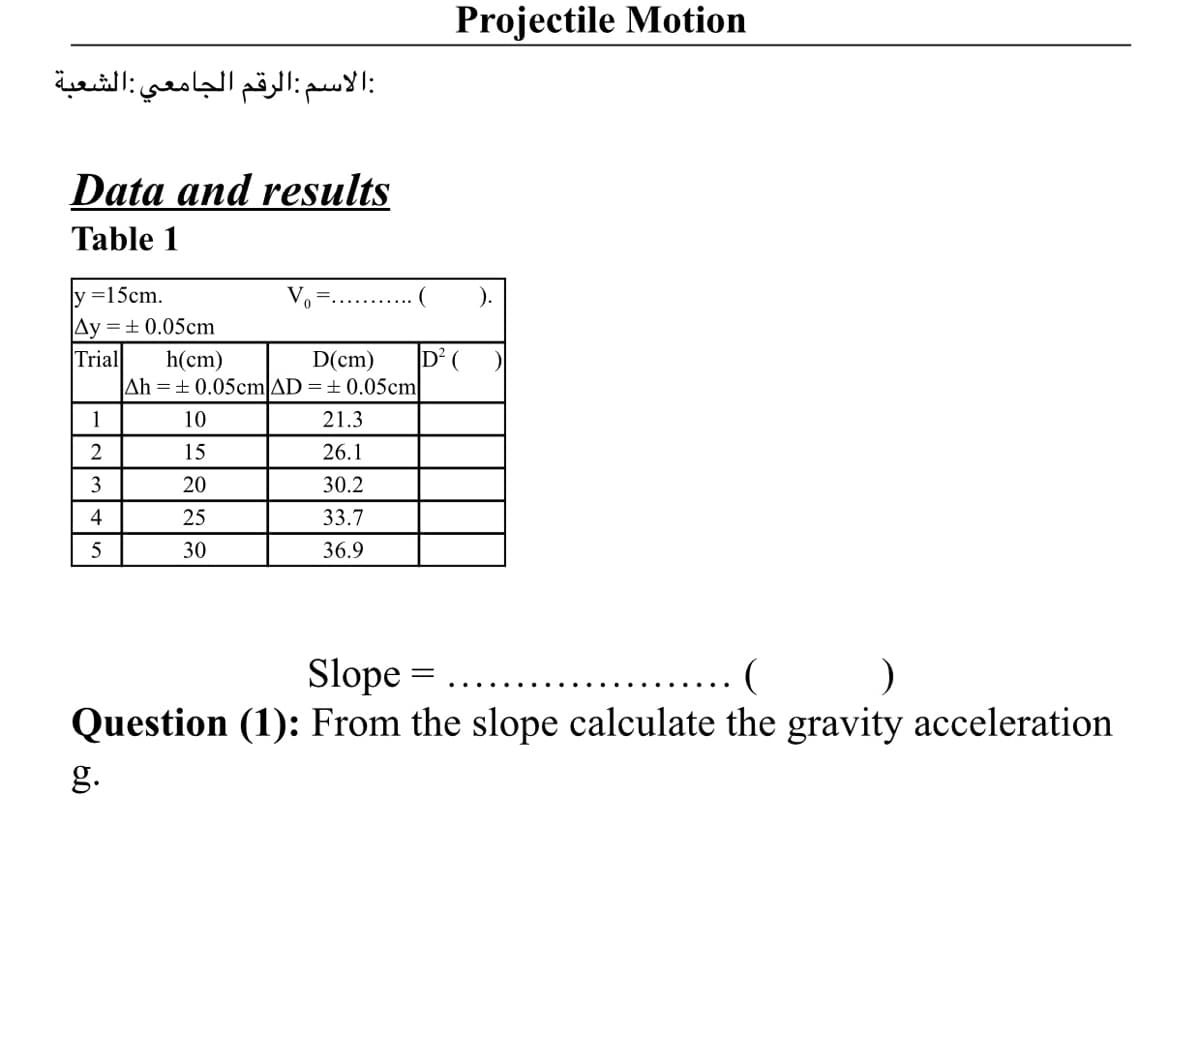 Projectile Motion
:الاسم:الرقم الجامعي الشعبة
Data and results
Table 1
ly =15cm.
).
Ay =± 0.05cm
Trial
h(cm)
Ah =±0.05cmAD =± 0.05cm
D(
D(cm)
1
10
21.3
2
15
26.1
3
20
30.2
4
25
33.7
30
36.9
Slope =
(
Question (1): From the slope calculate the gravity acceleration
g.
